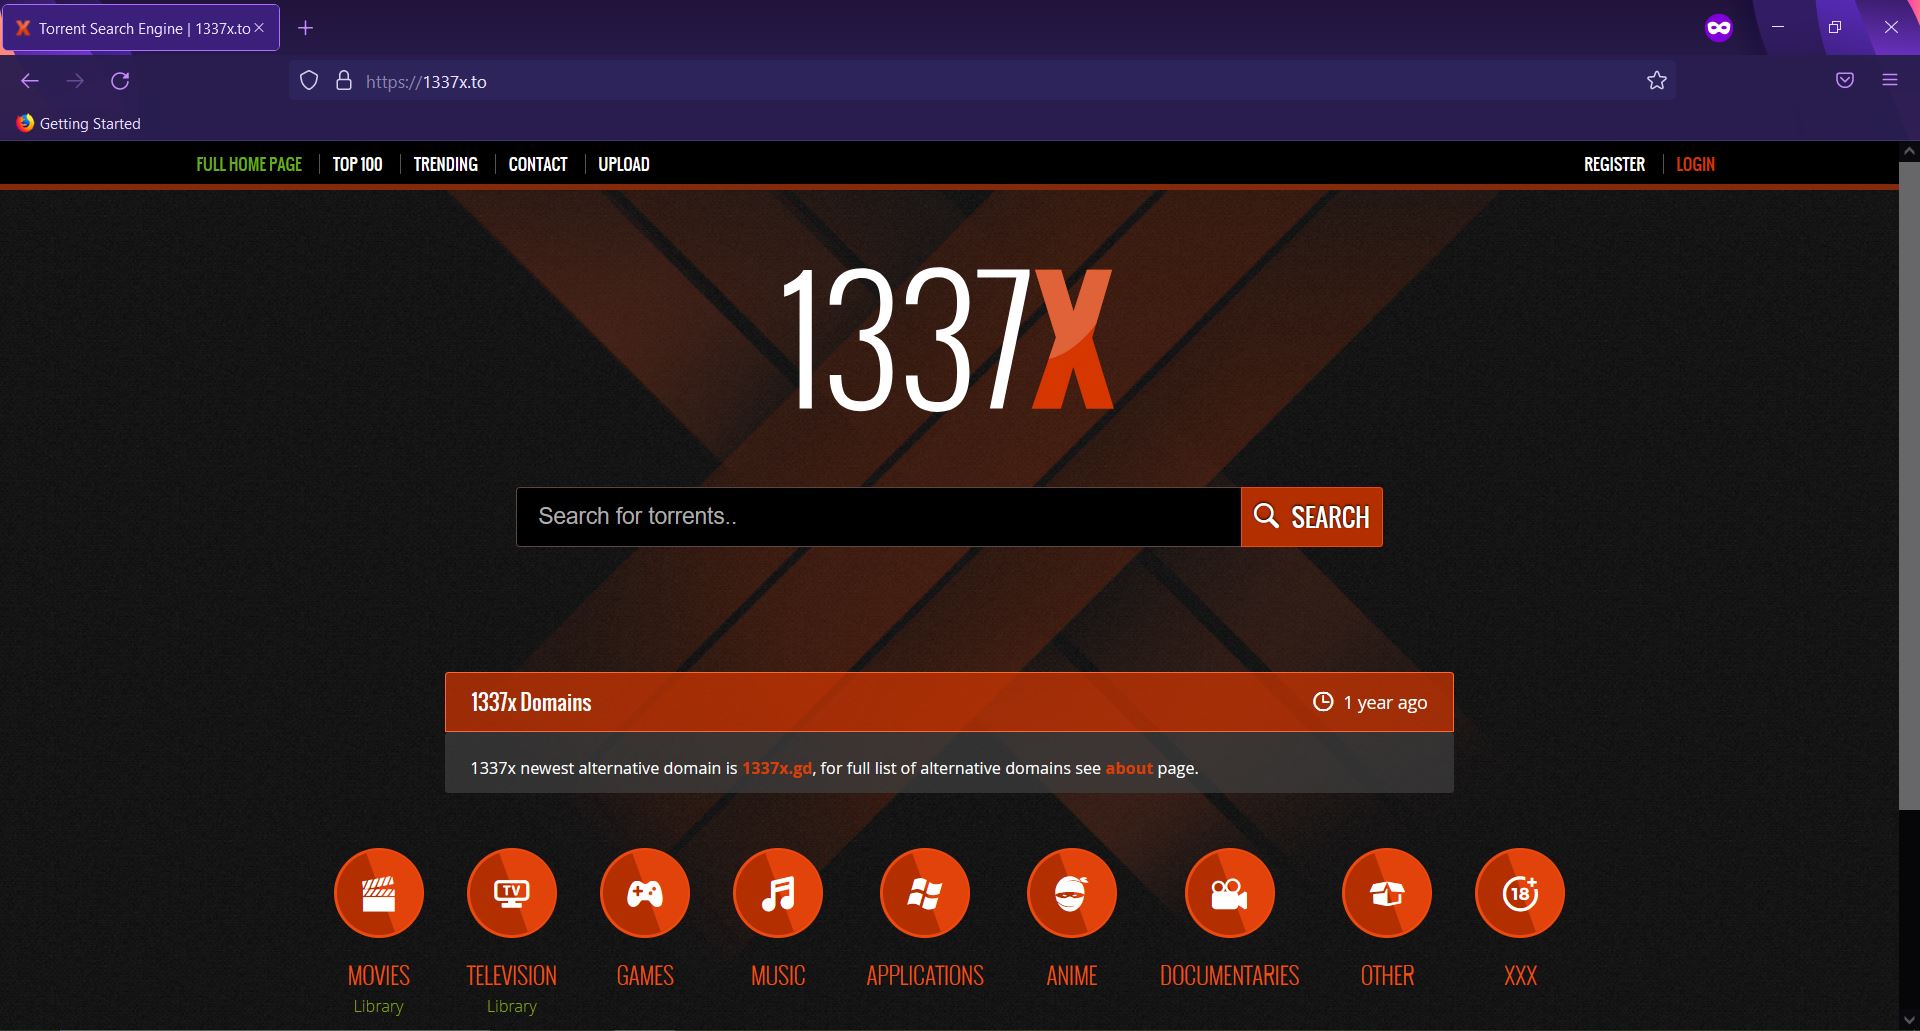 1337x.to ads in the browser sensorstechforum